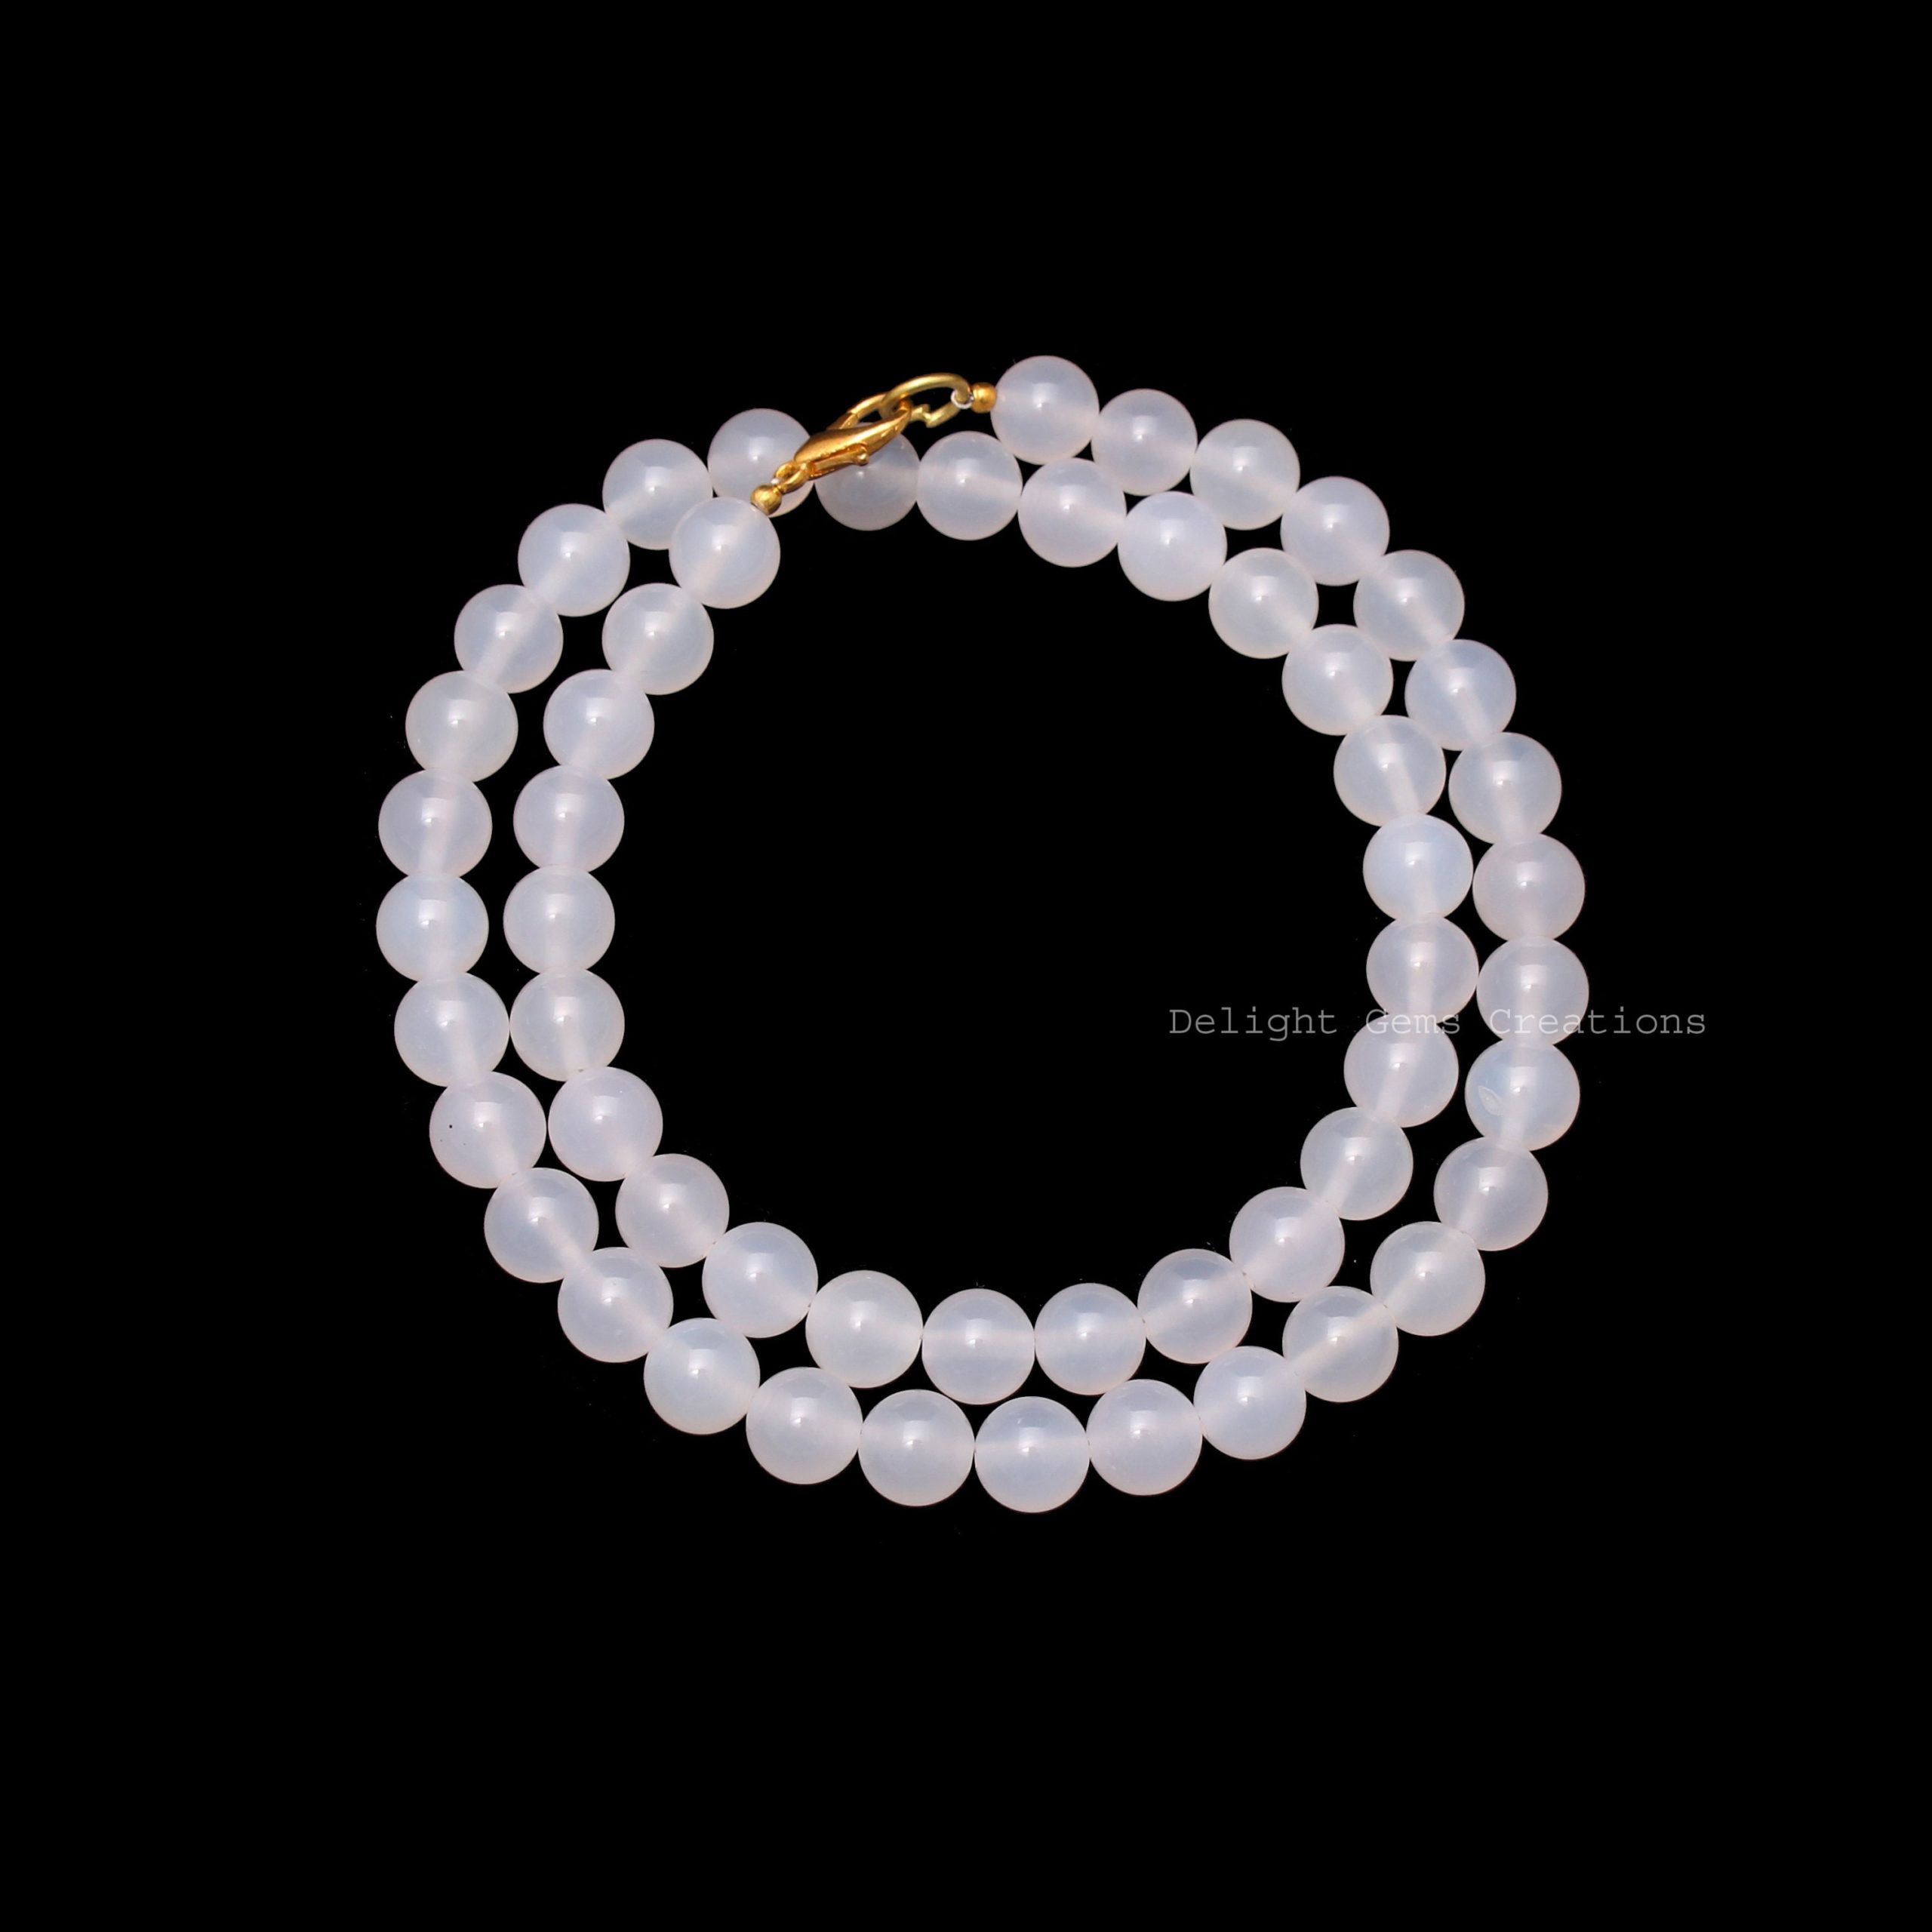 Natural White Quartz Beaded Necklace-aaa Quartz Necklace-beaded Necklace-women Necklace-handmade Necklace-white Gemstone Necklace-gift Ideas